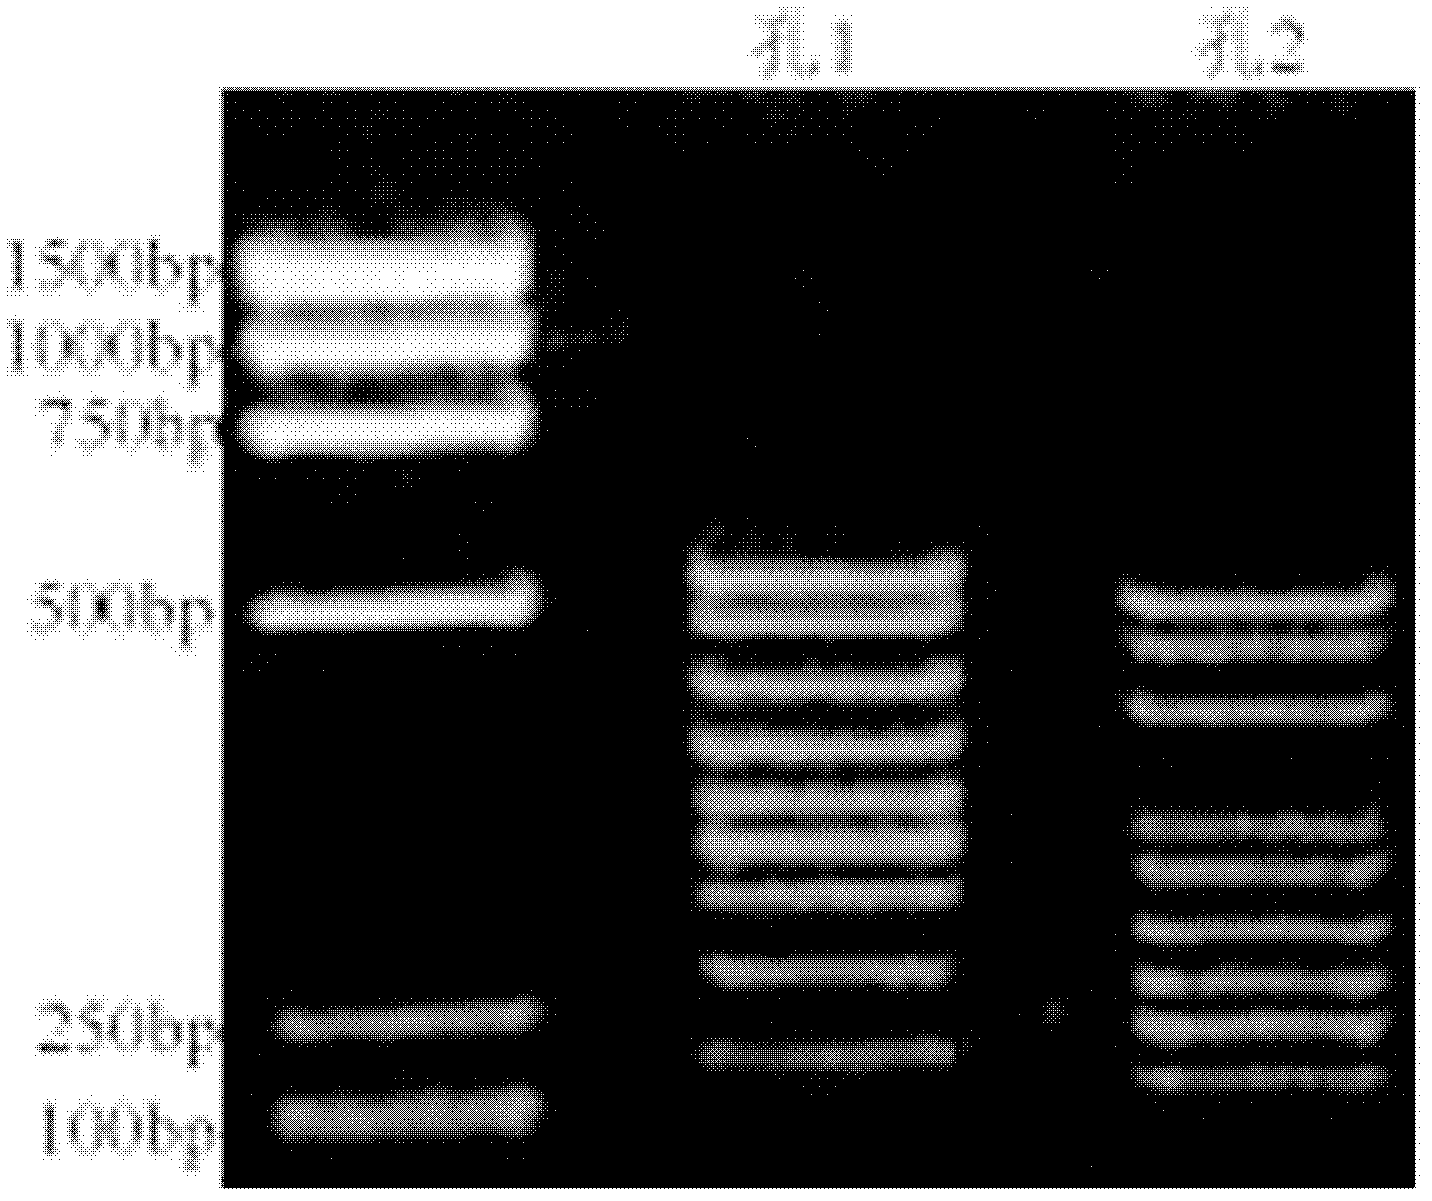 Chip and method for real-time PCR (polymerase chain reaction) gene detection at polygenic mutation site